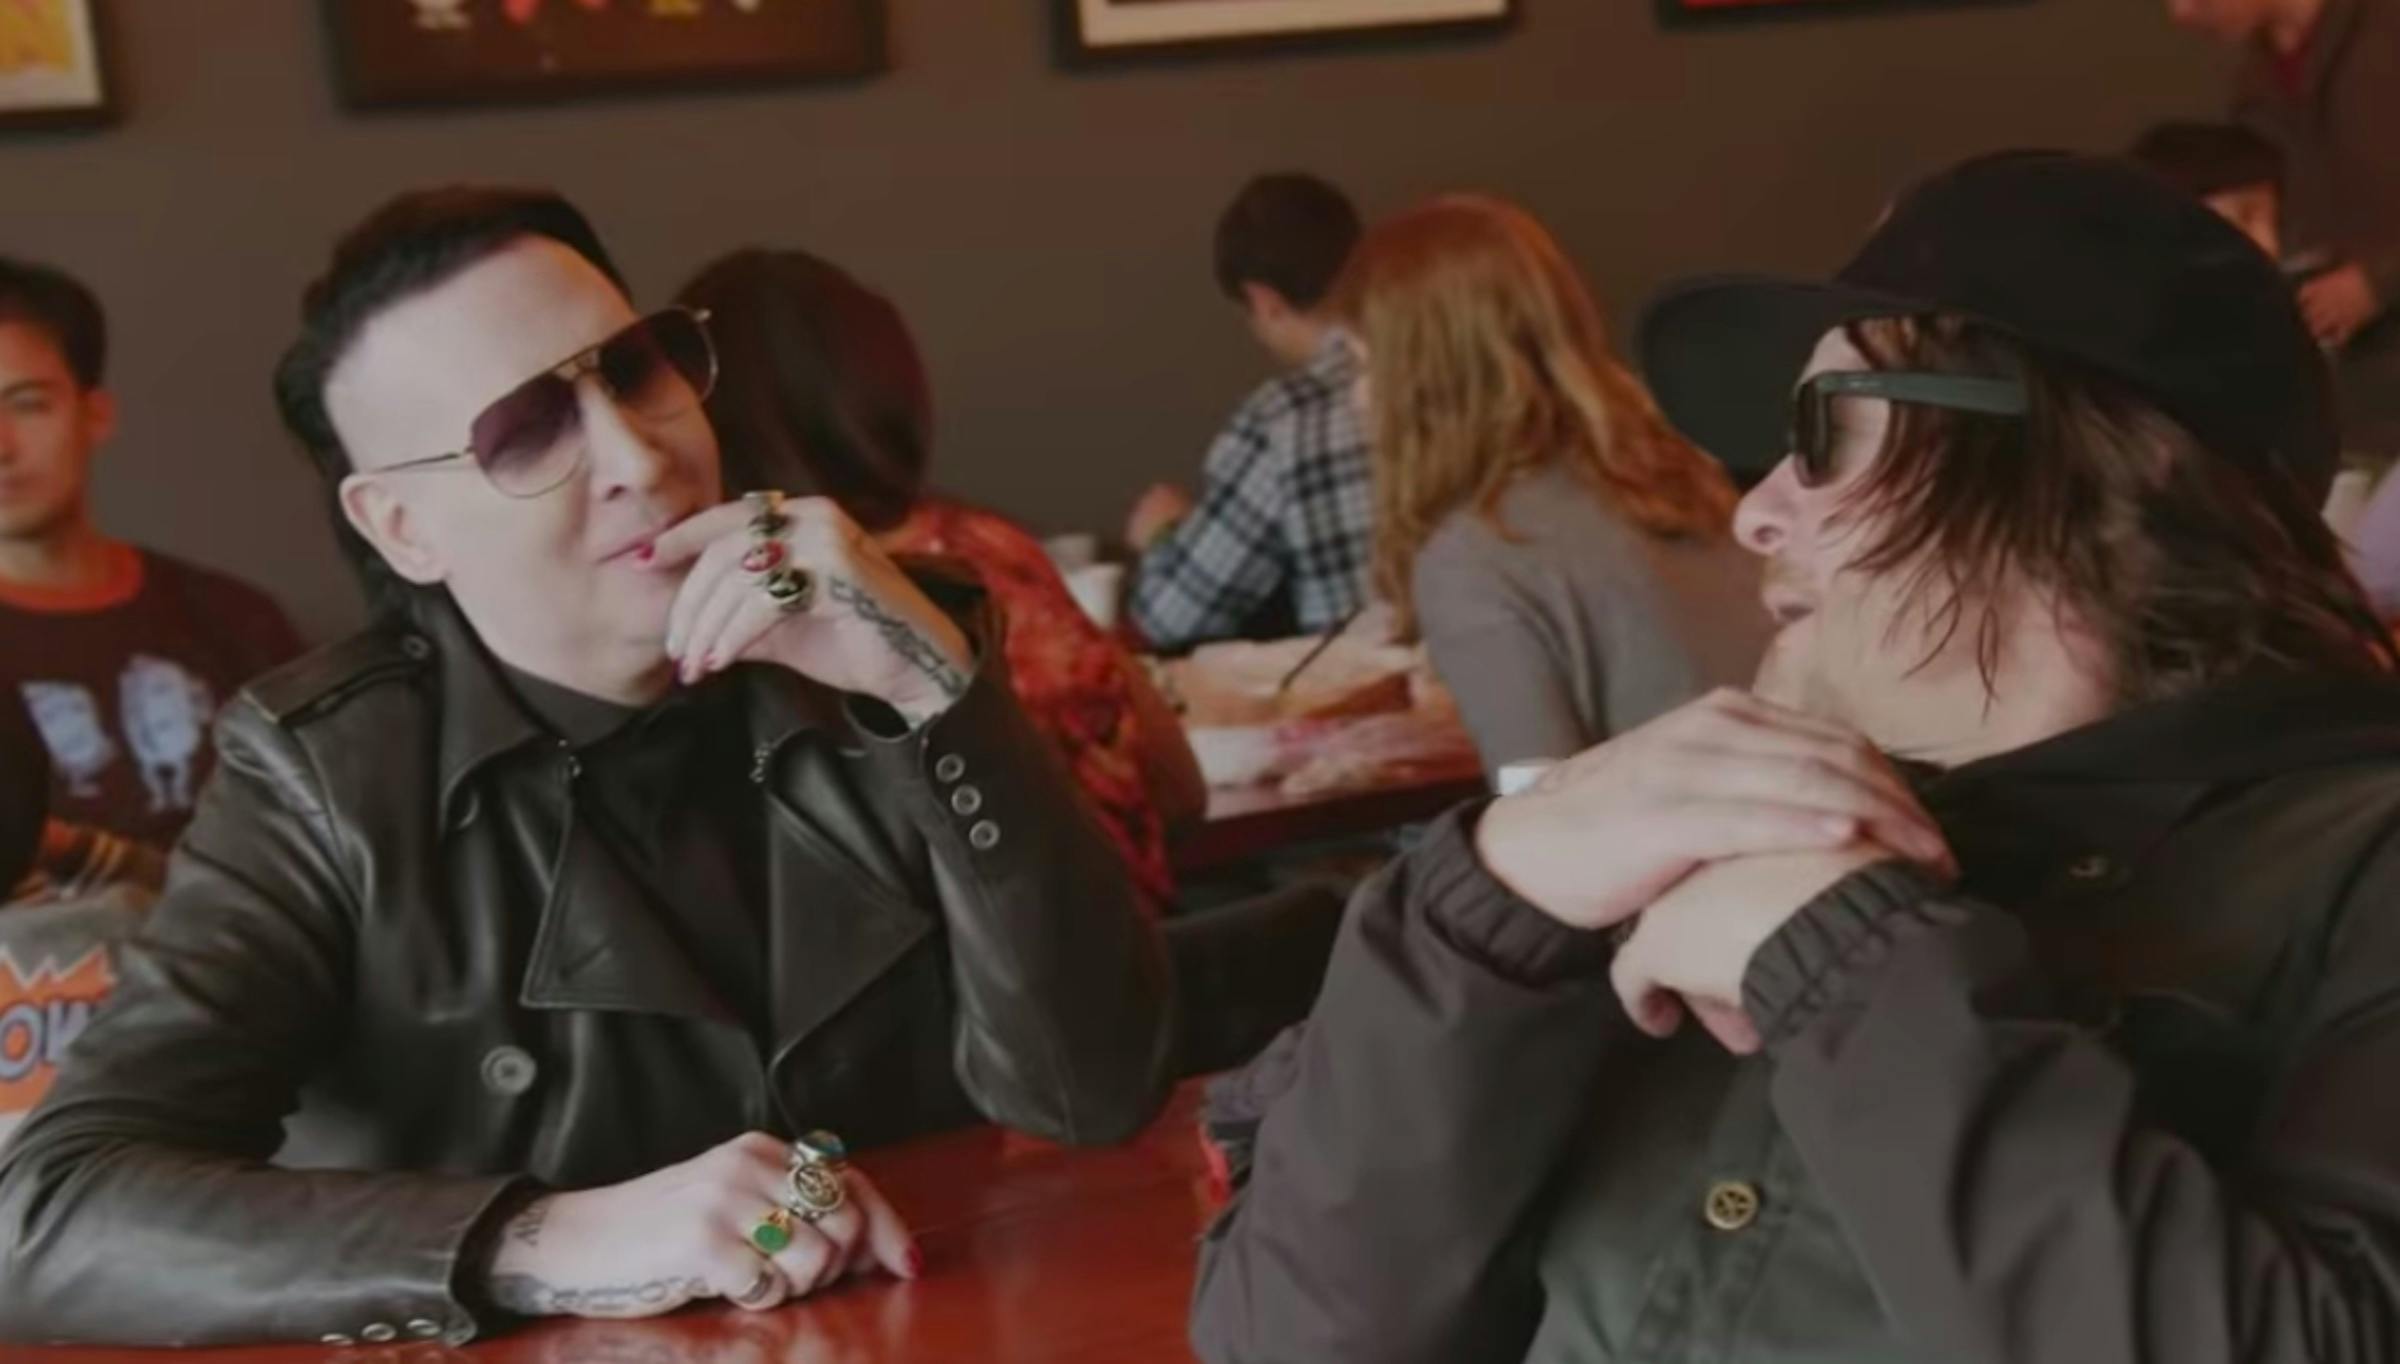 Marilyn Manson Talks Chicken And Carving Pentagrams In Chests With The Walking Dead's Norman Reedus